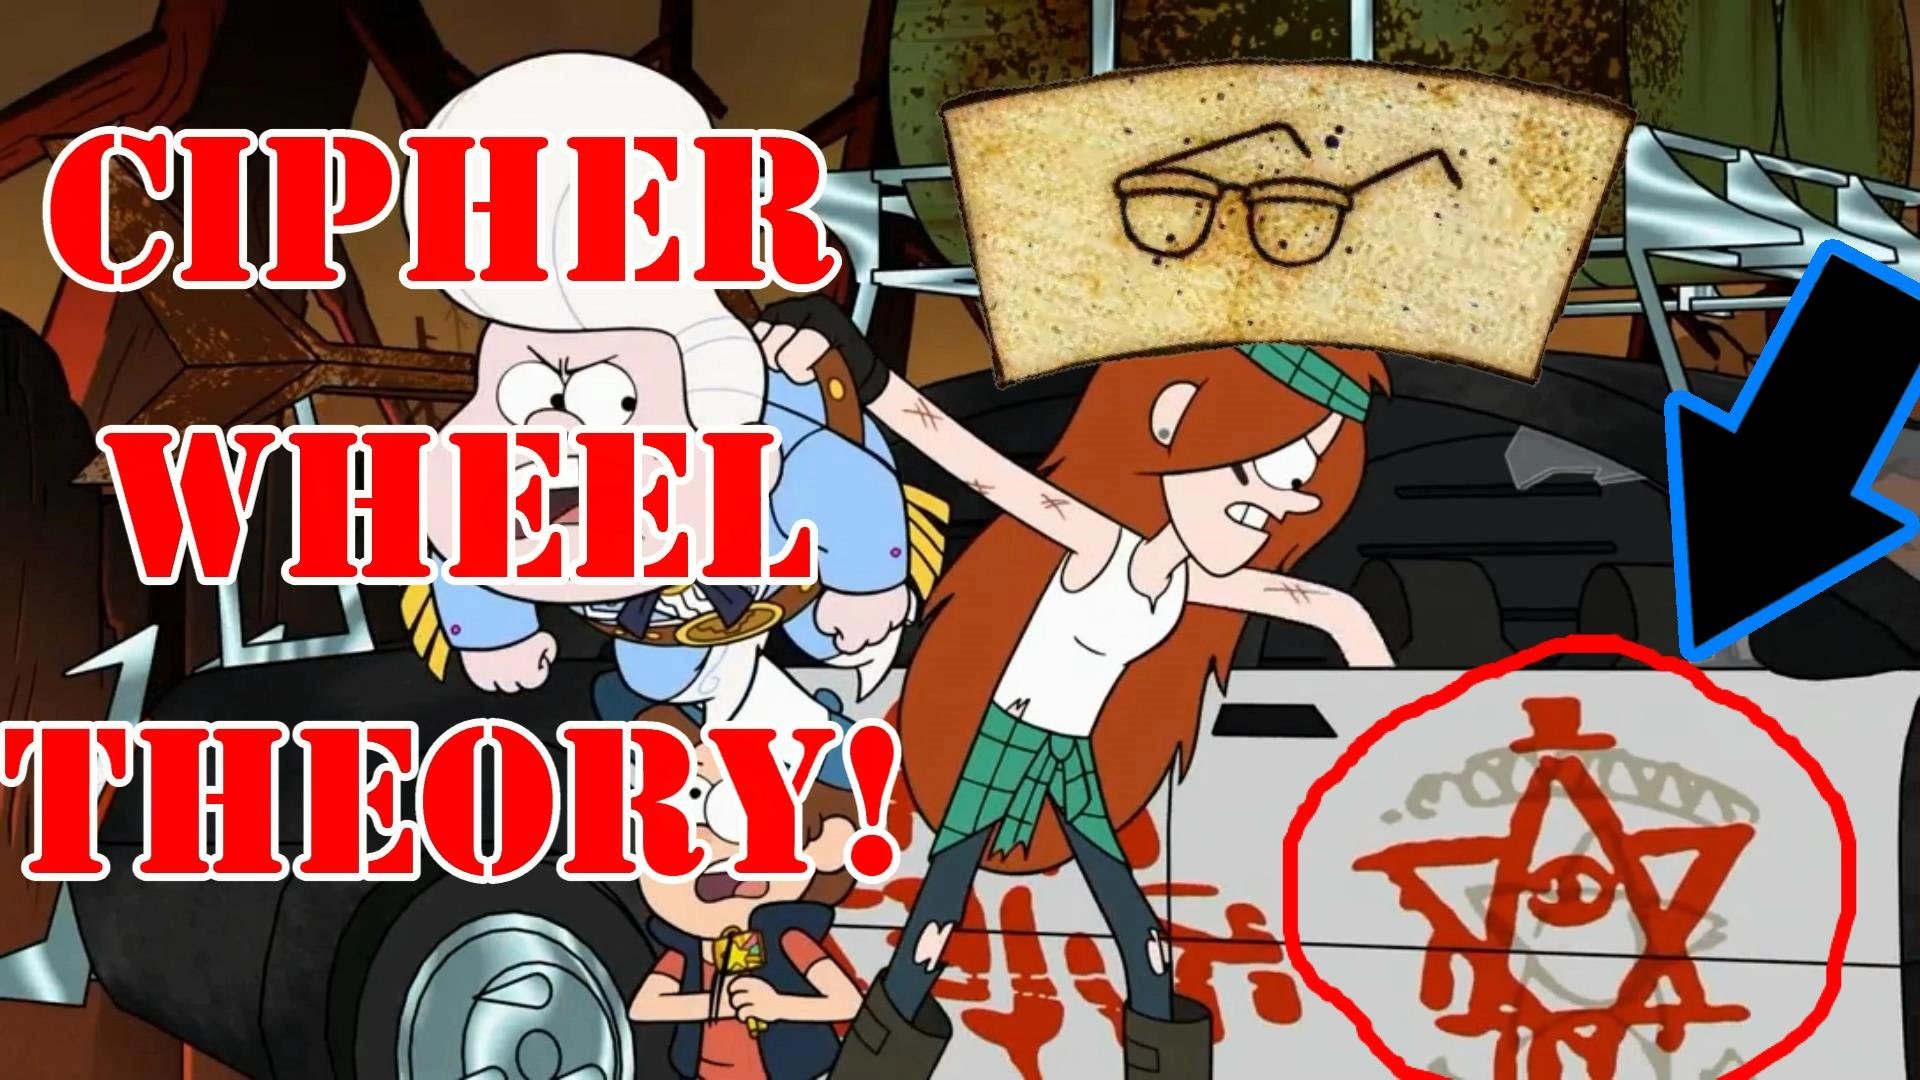 1920x1080 Gravity Falls: Confirmed Cipher Wheel Theory!? | TheNextBigThing - YouTube